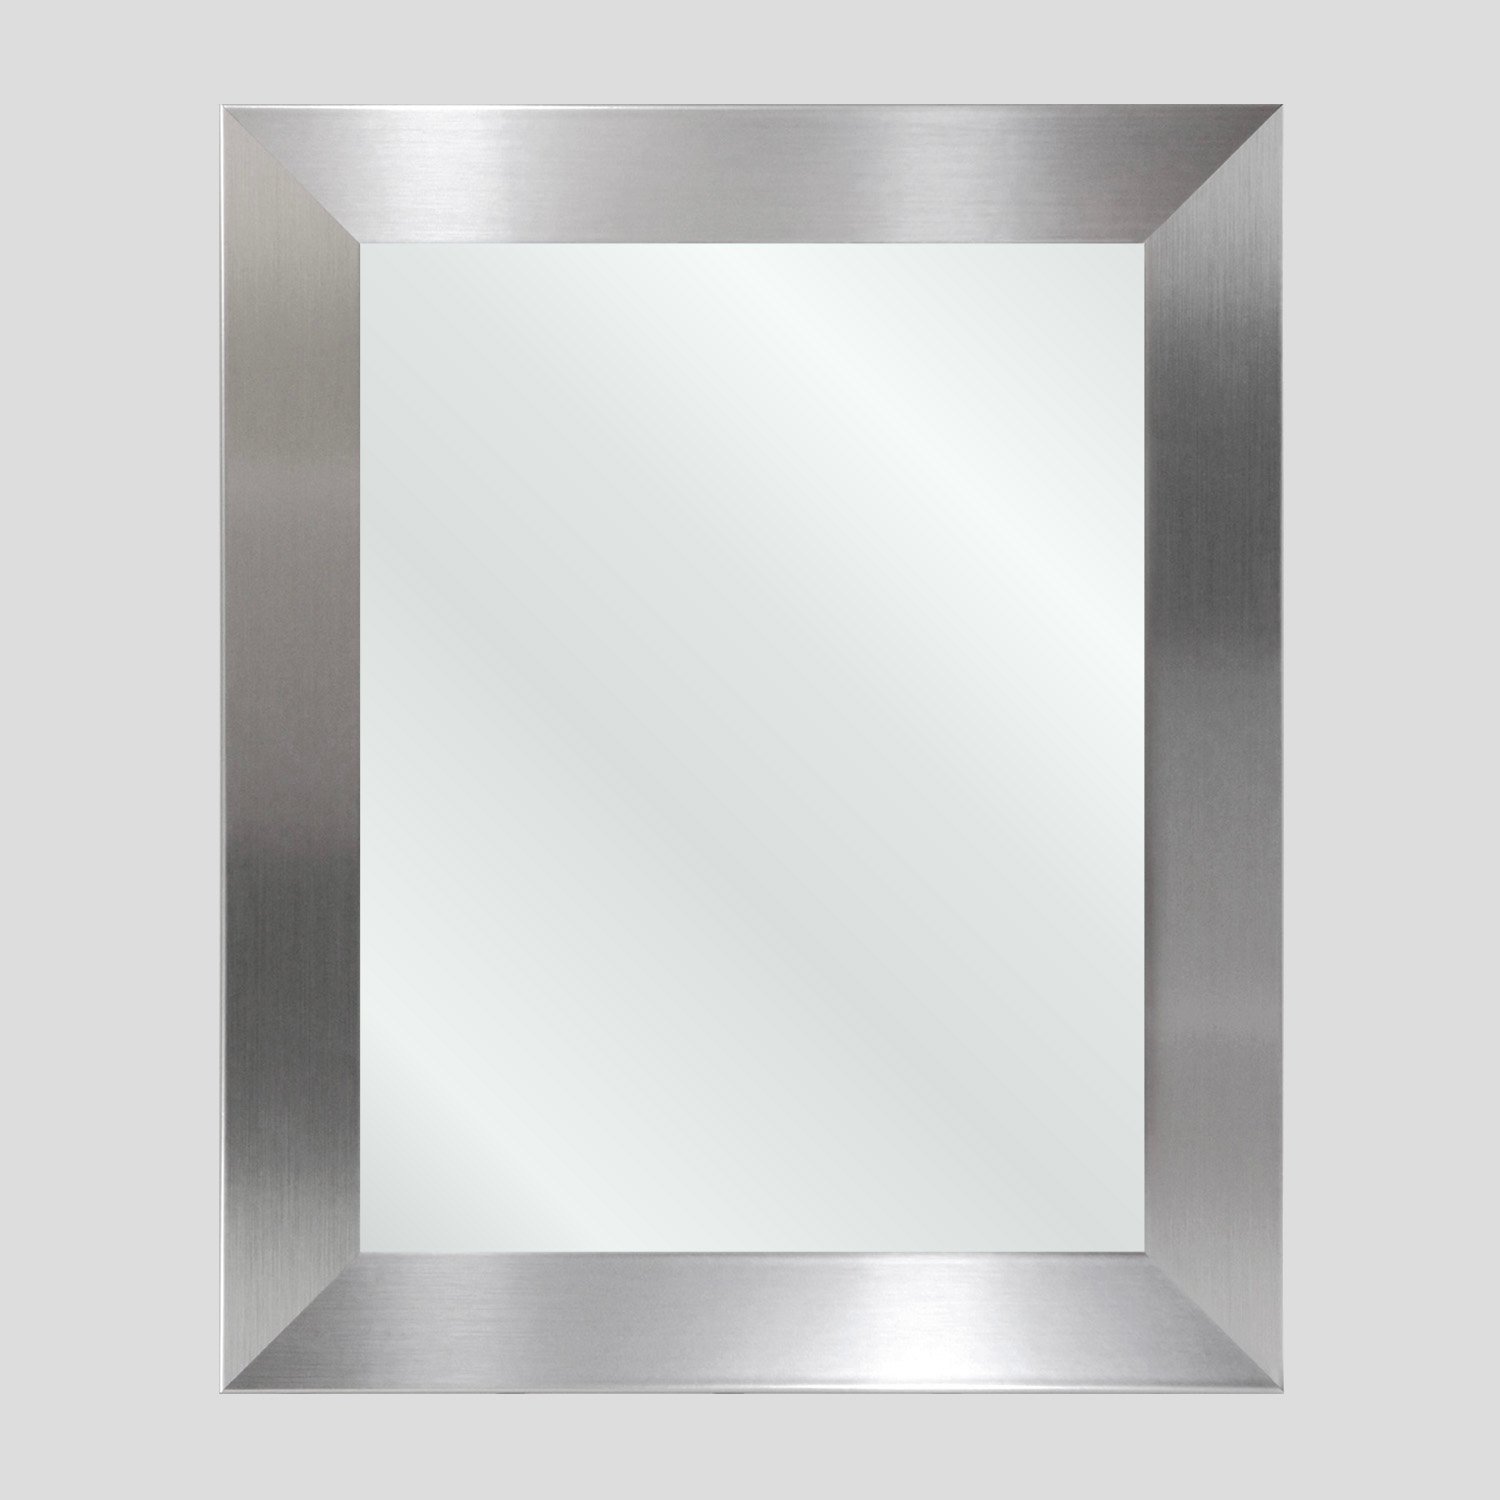 Stainless Steel Framed Mirror, Made to Order for your Bathroom